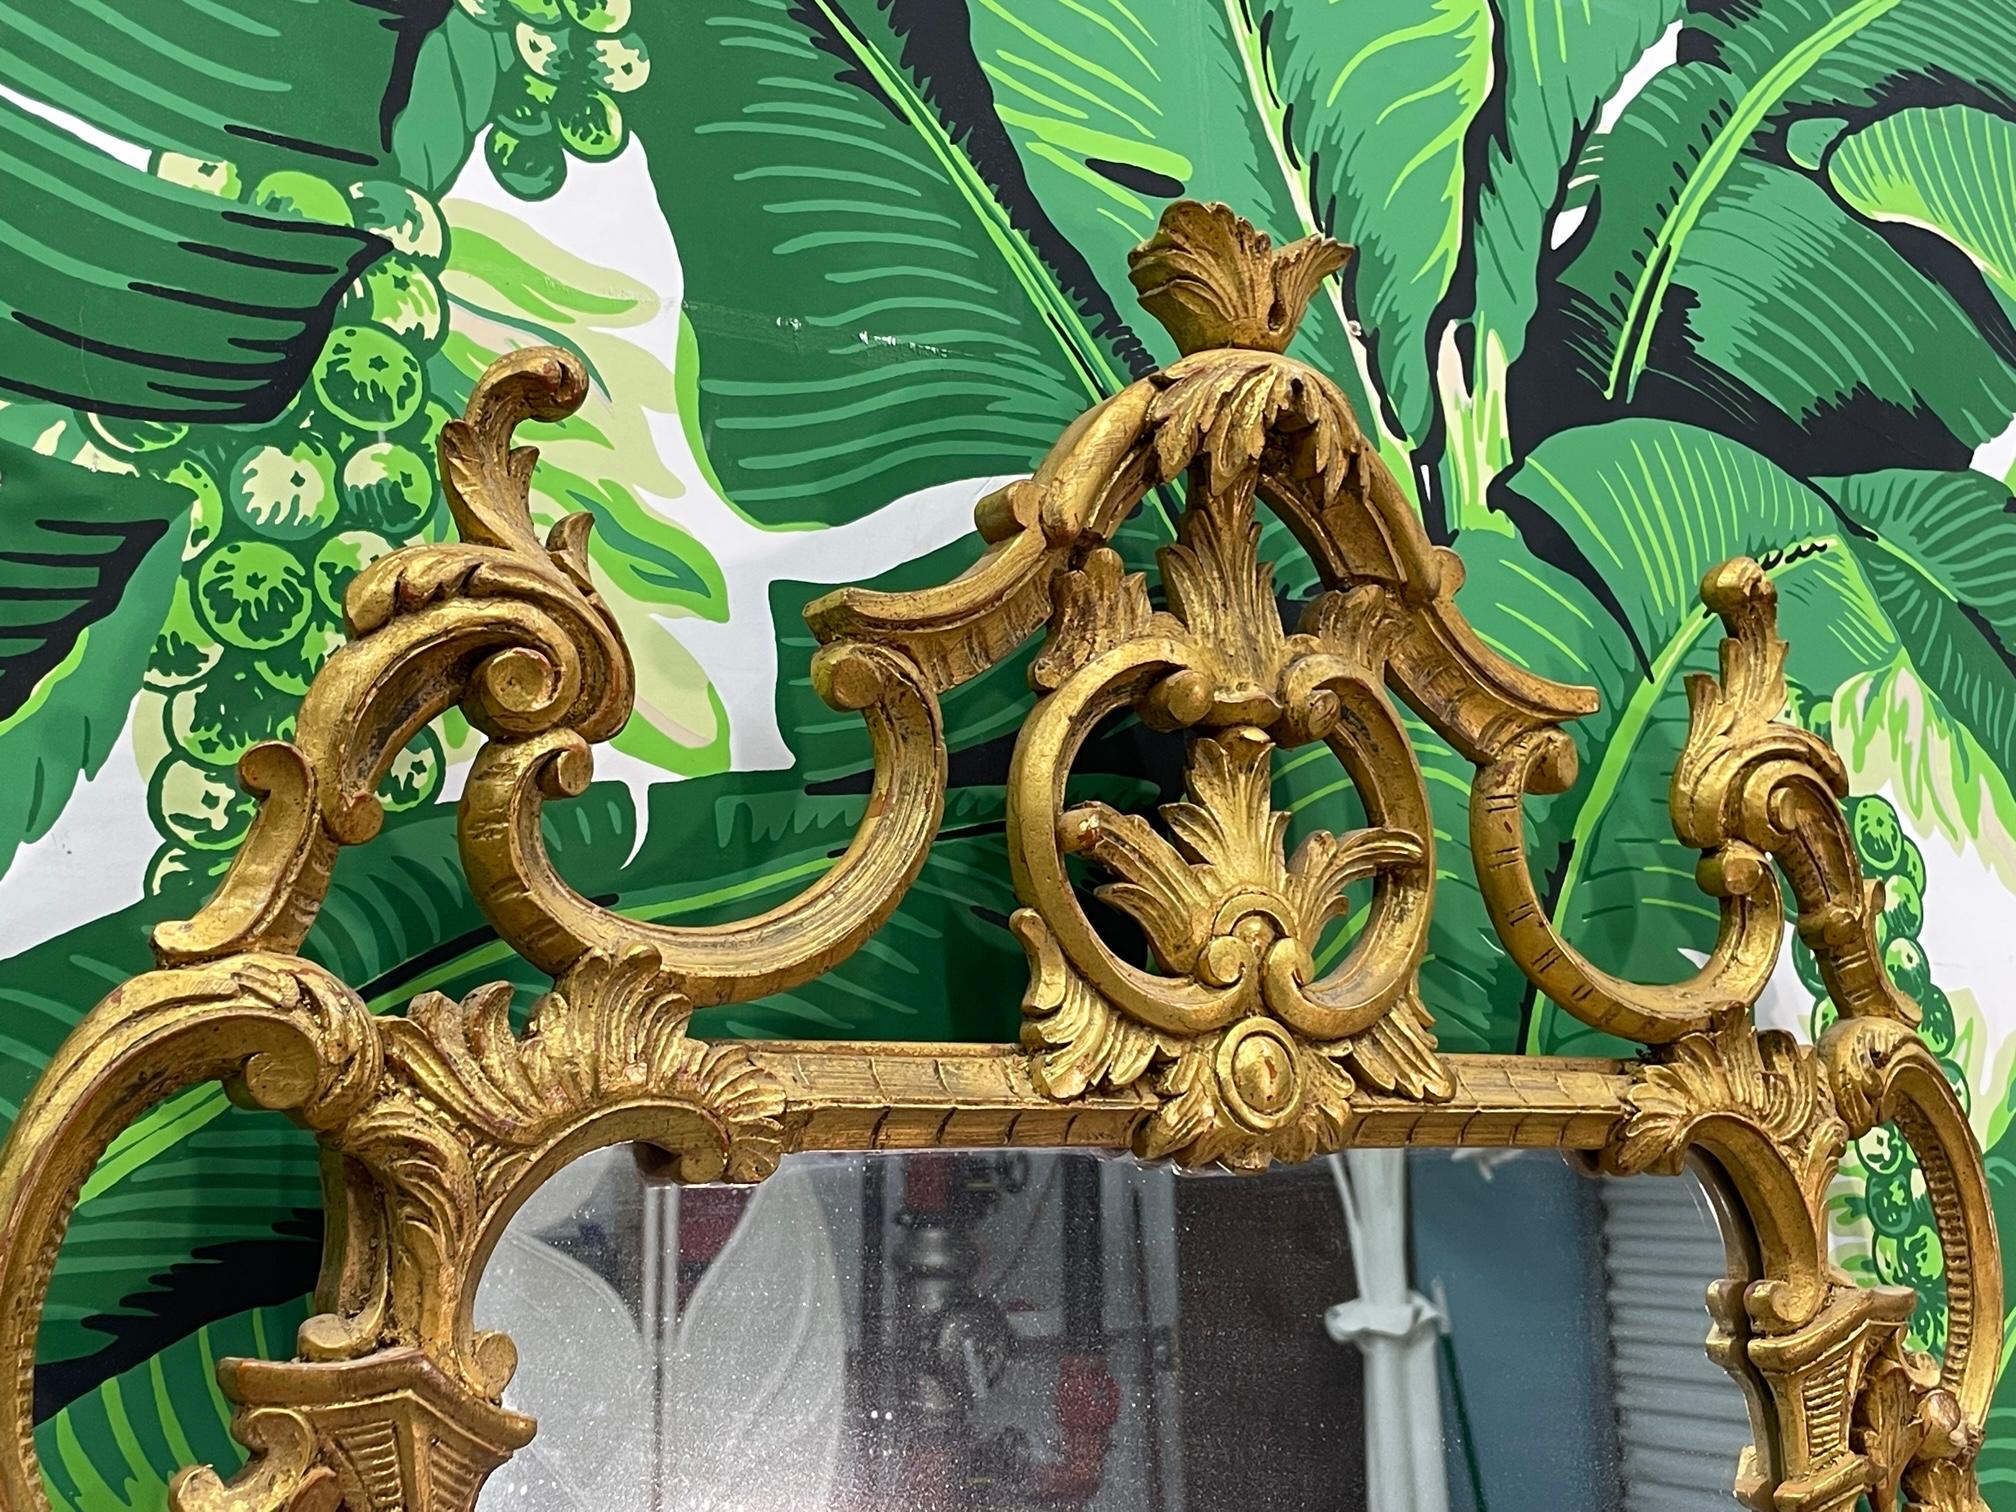 Hand carved midcentury wall mirror features and ornate pierced frame of acanthus leaves and columns and a gold gilded finish. Good condition with minor imperfections consistent with age, see photos for condition details.


